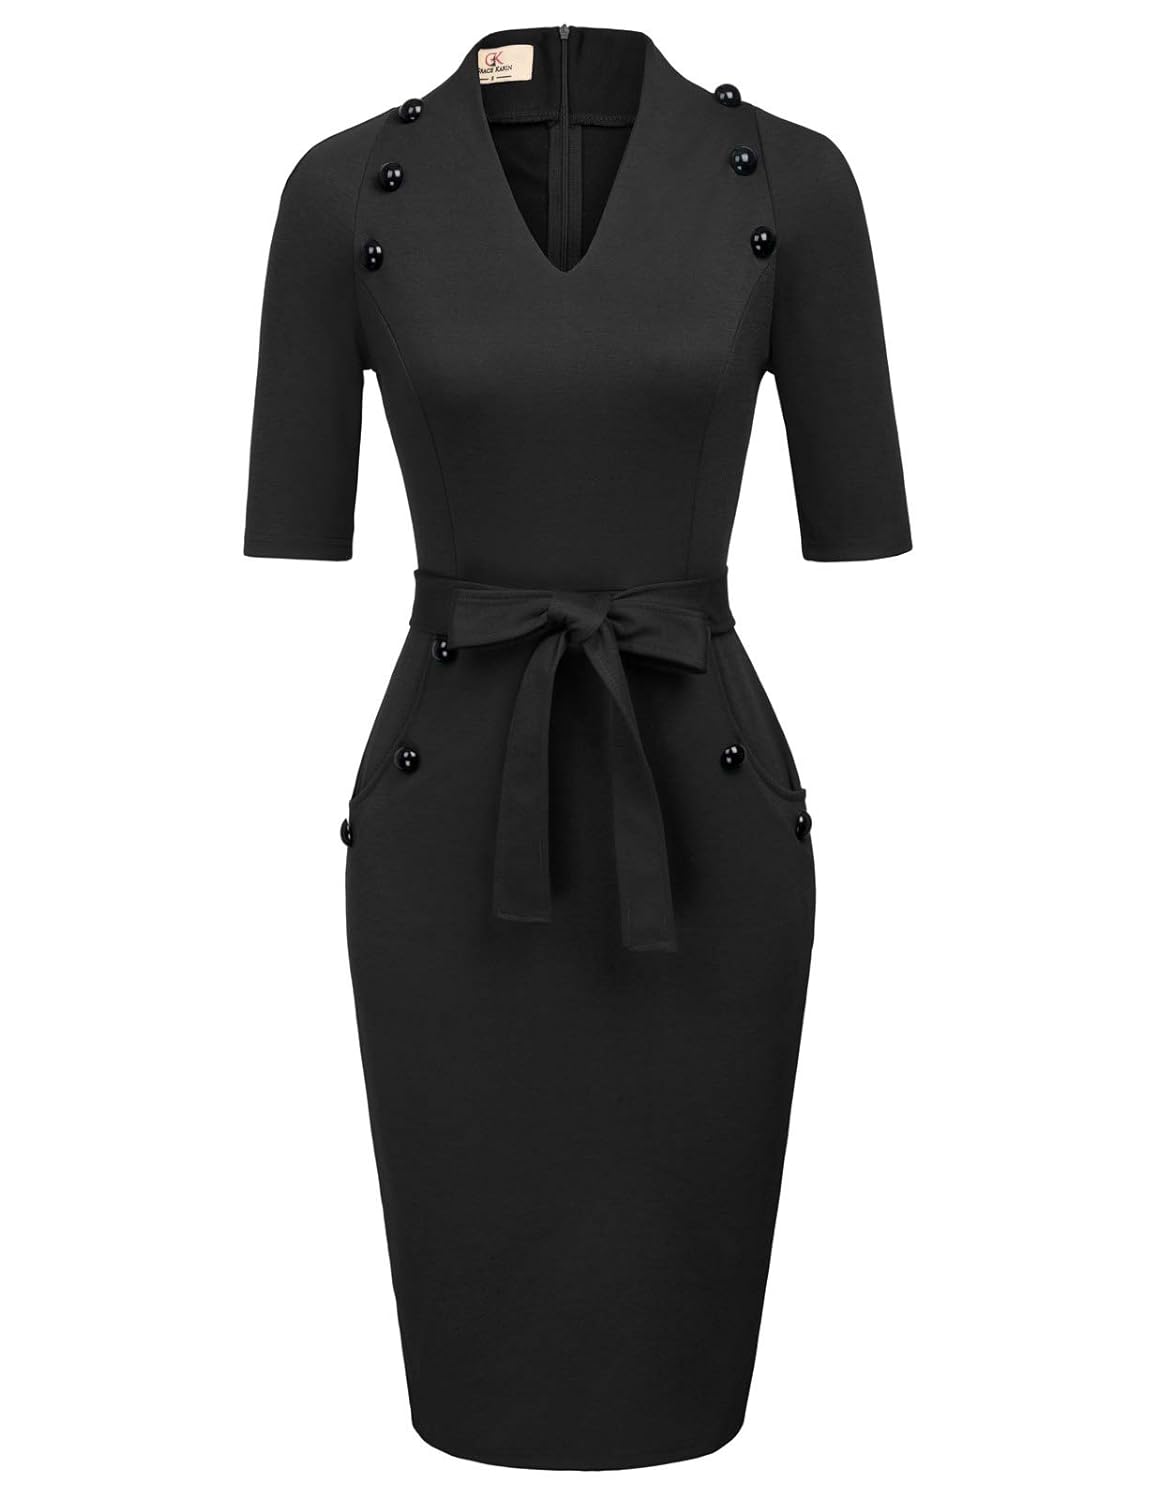 GRACE KARIN Women's Short Sleeve Bodycon Dress Belted Business Cocktail Funeral Pencil Dress with Procket